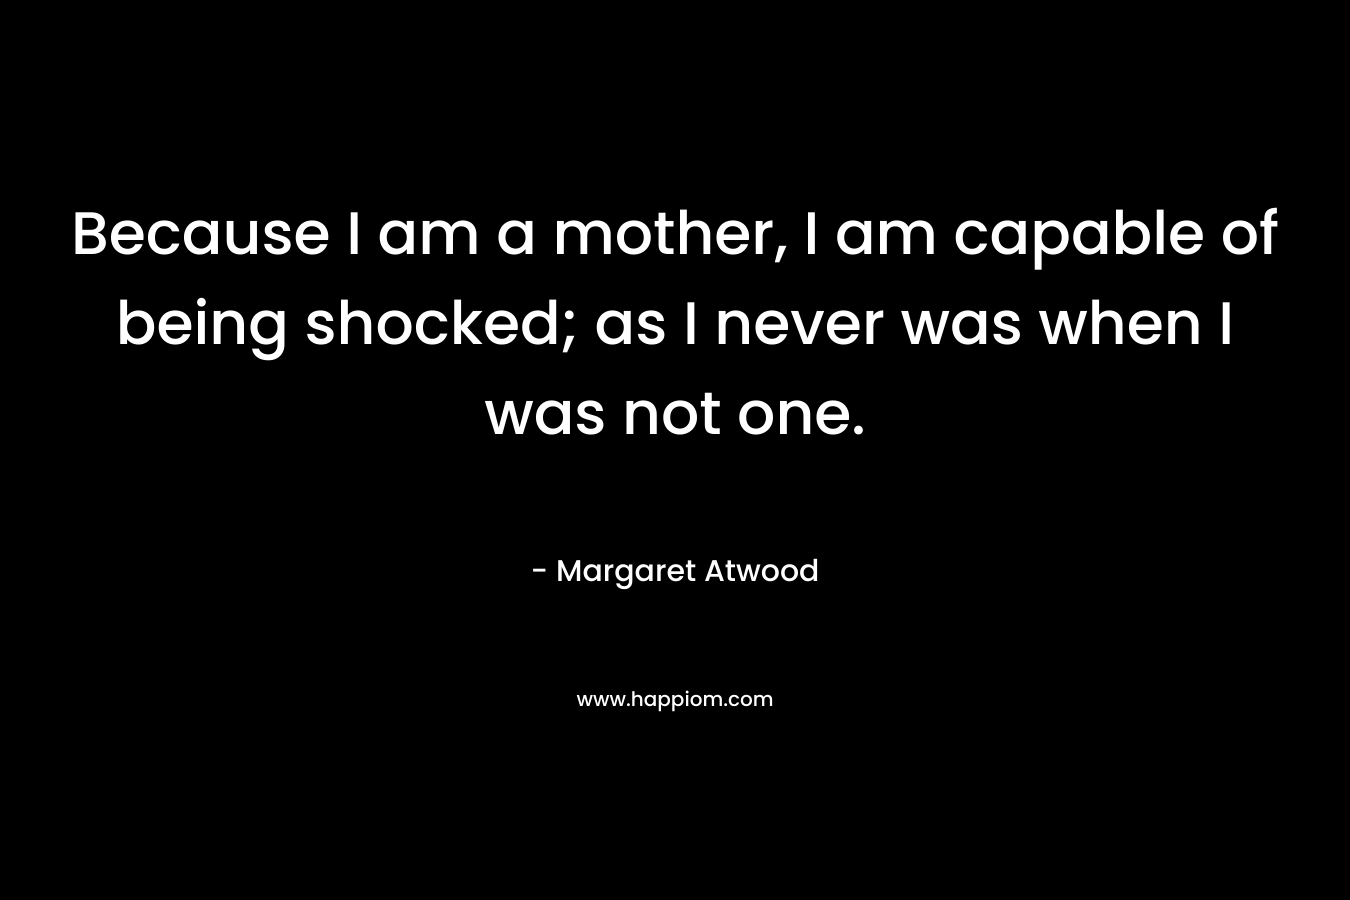 Because I am a mother, I am capable of being shocked; as I never was when I was not one. – Margaret Atwood